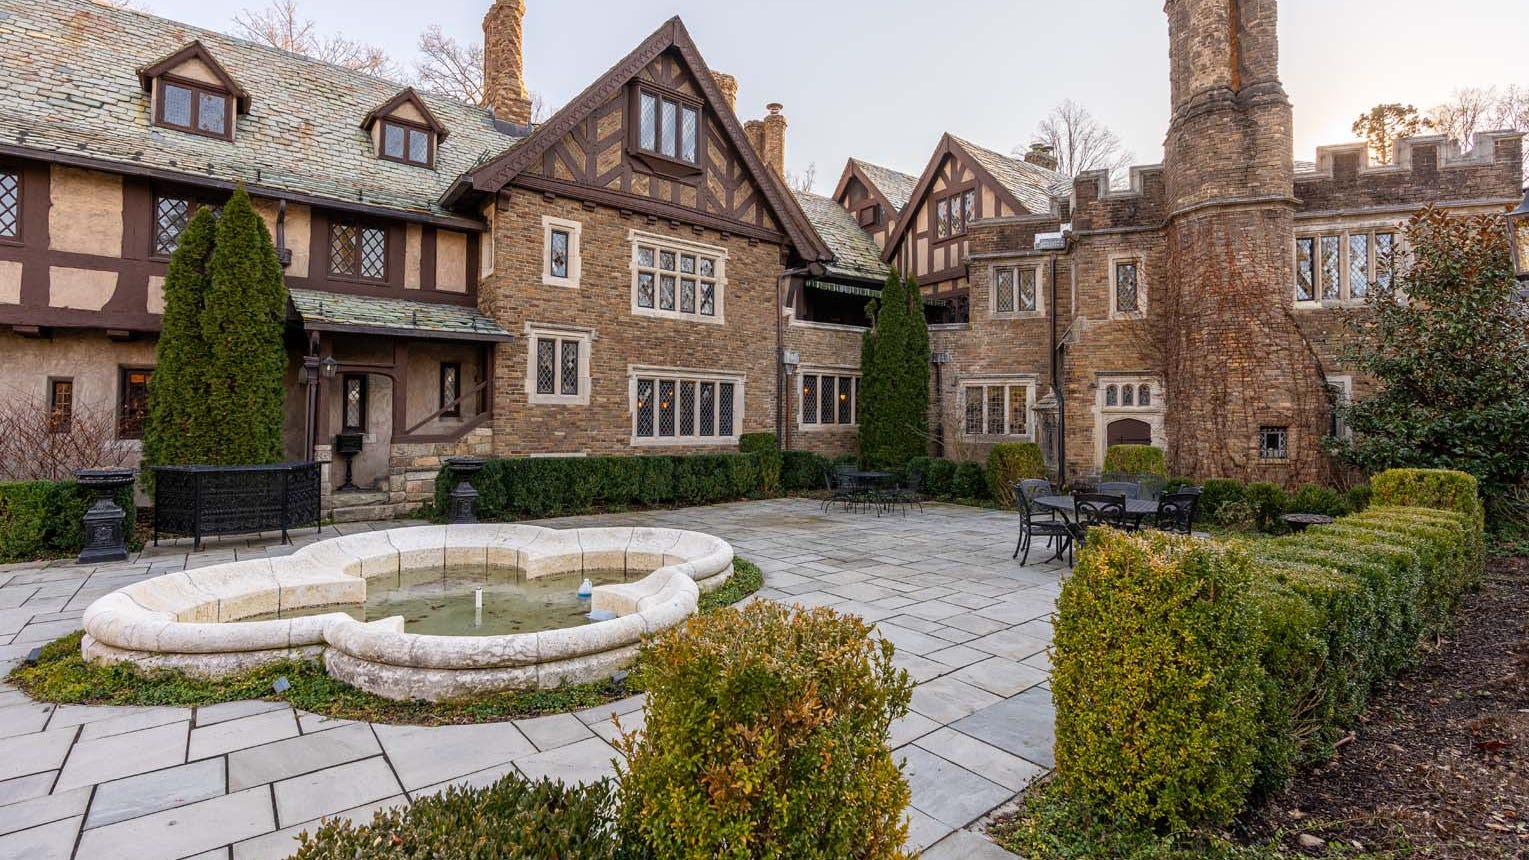 North Jersey Tudor castle replica with dungeon and modern twist listed for $11.5M